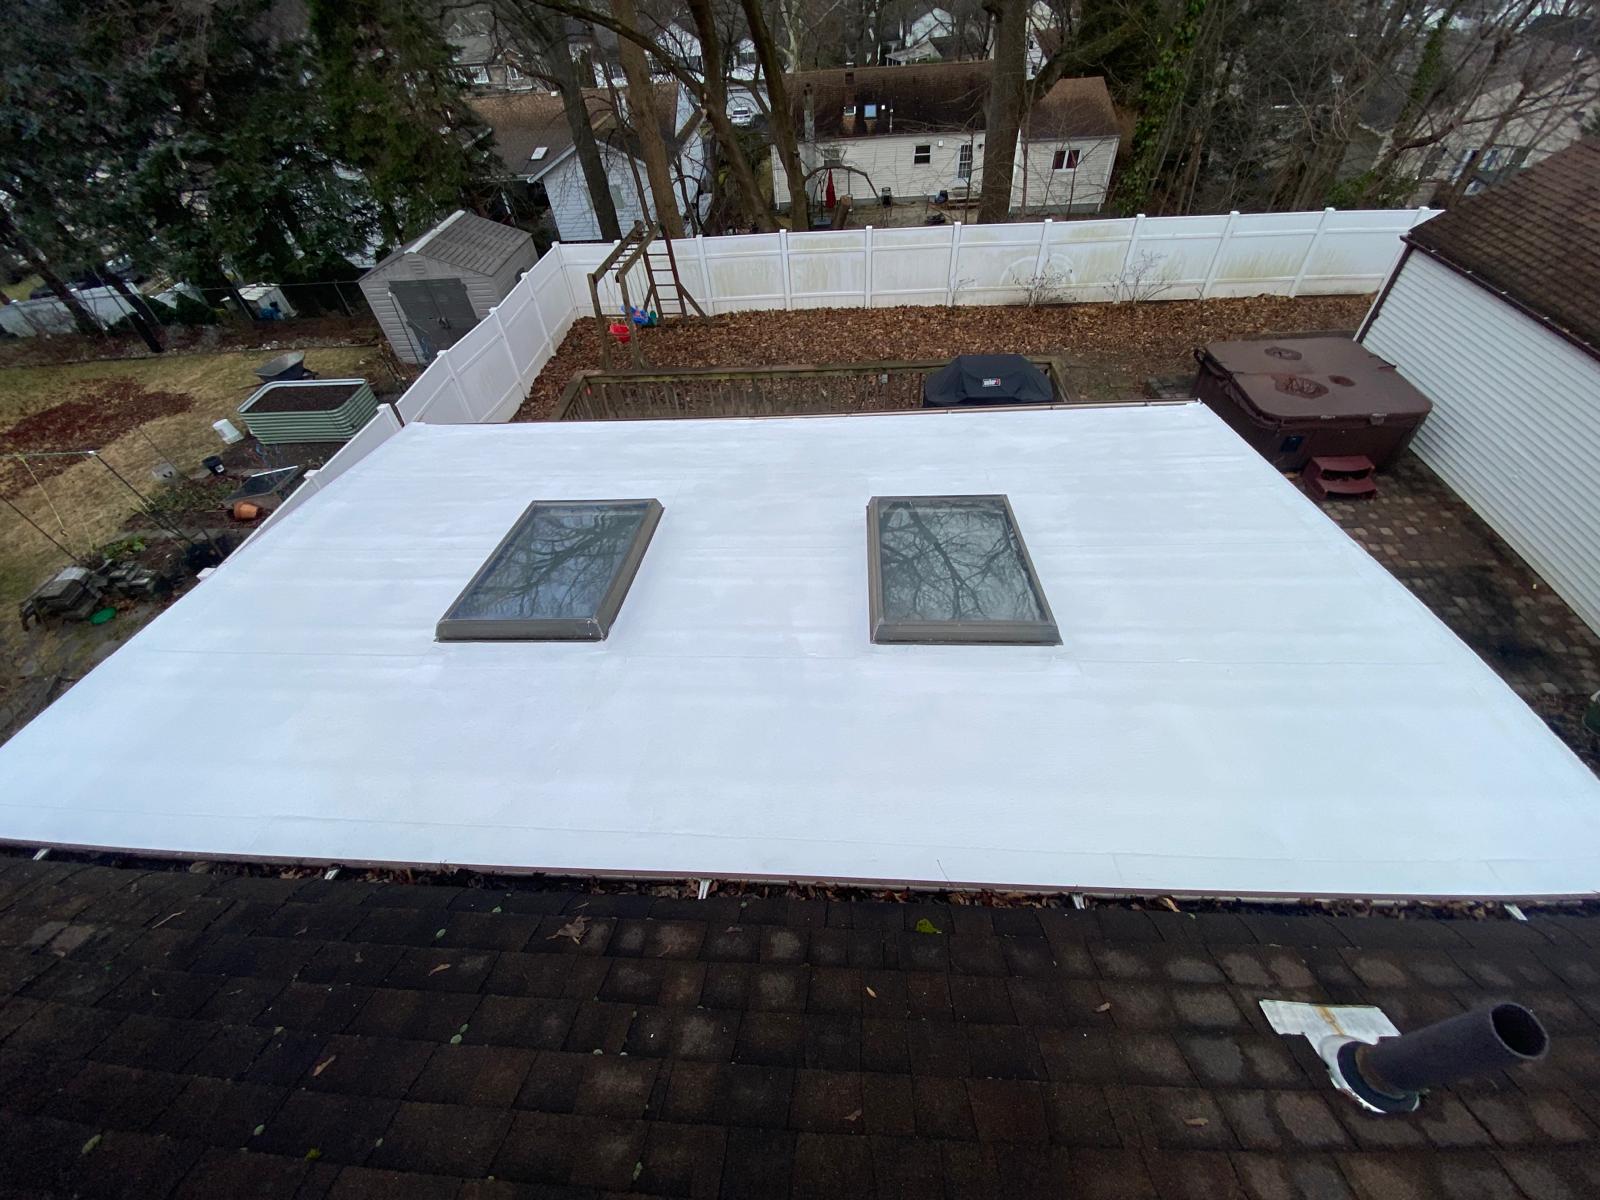 New Flat Roof Installation with Silicone Roof in Paramus NJ Project Shot 7